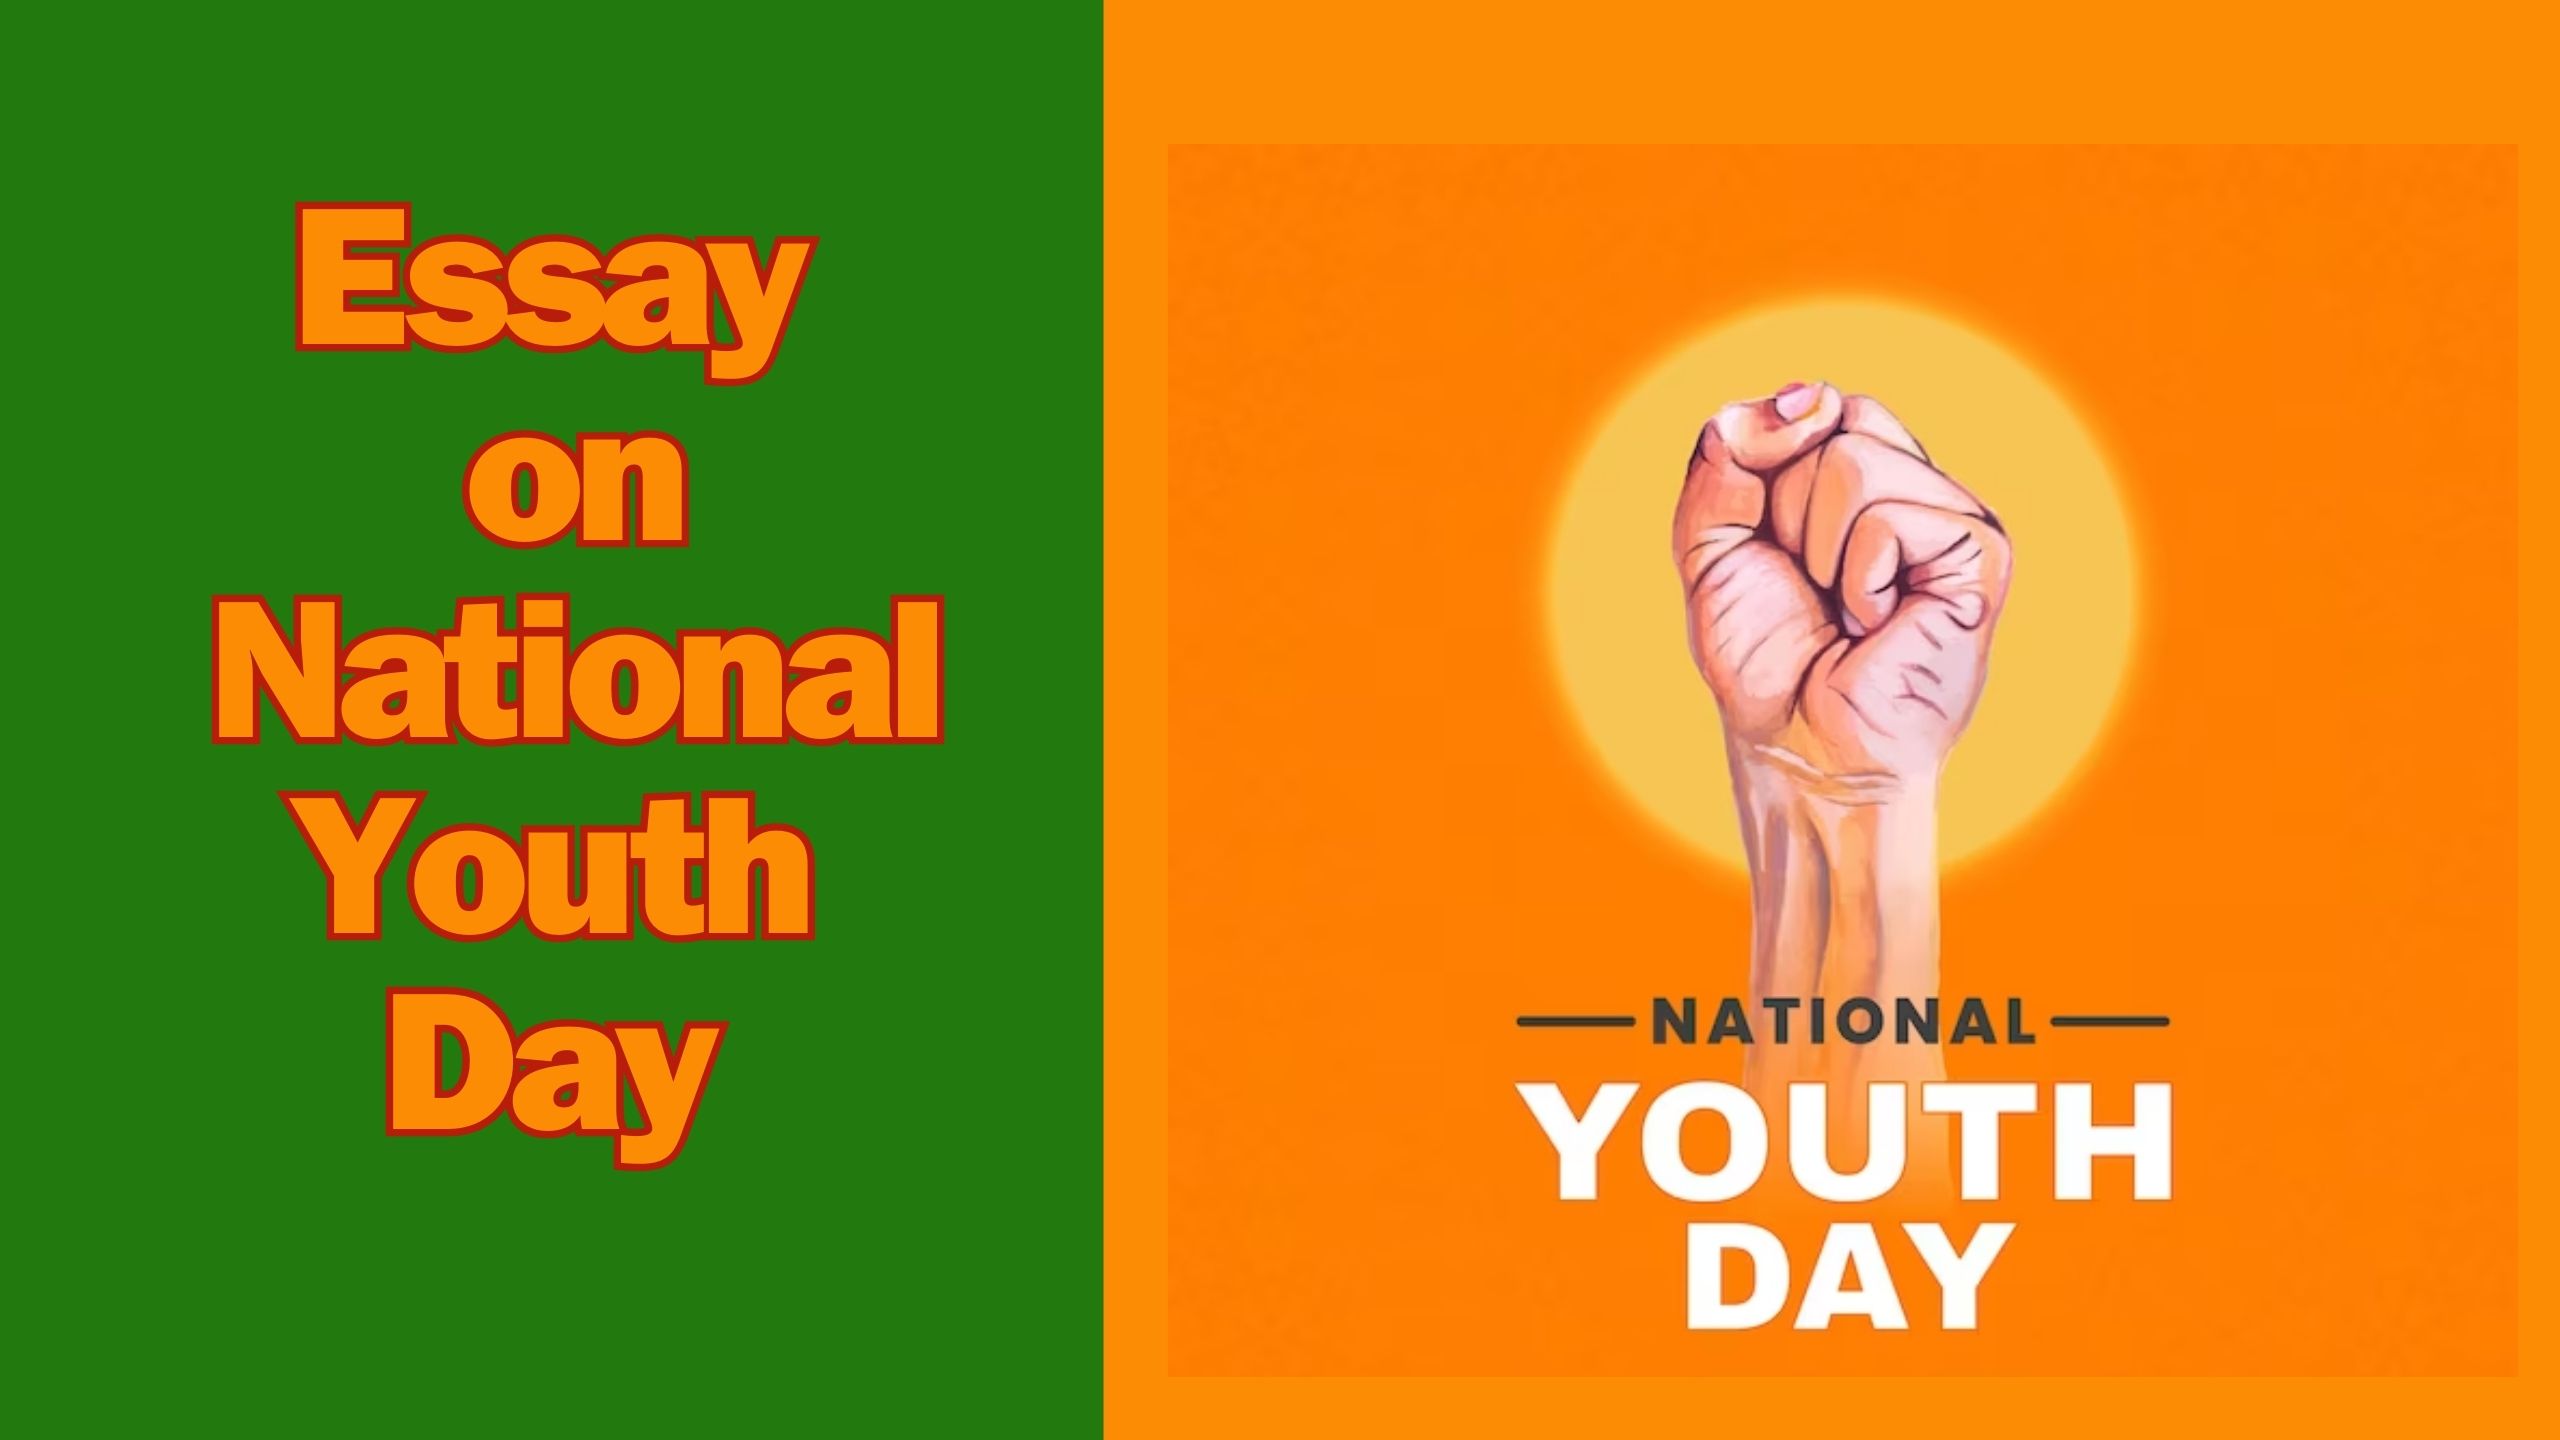 Essay on National Youth Day